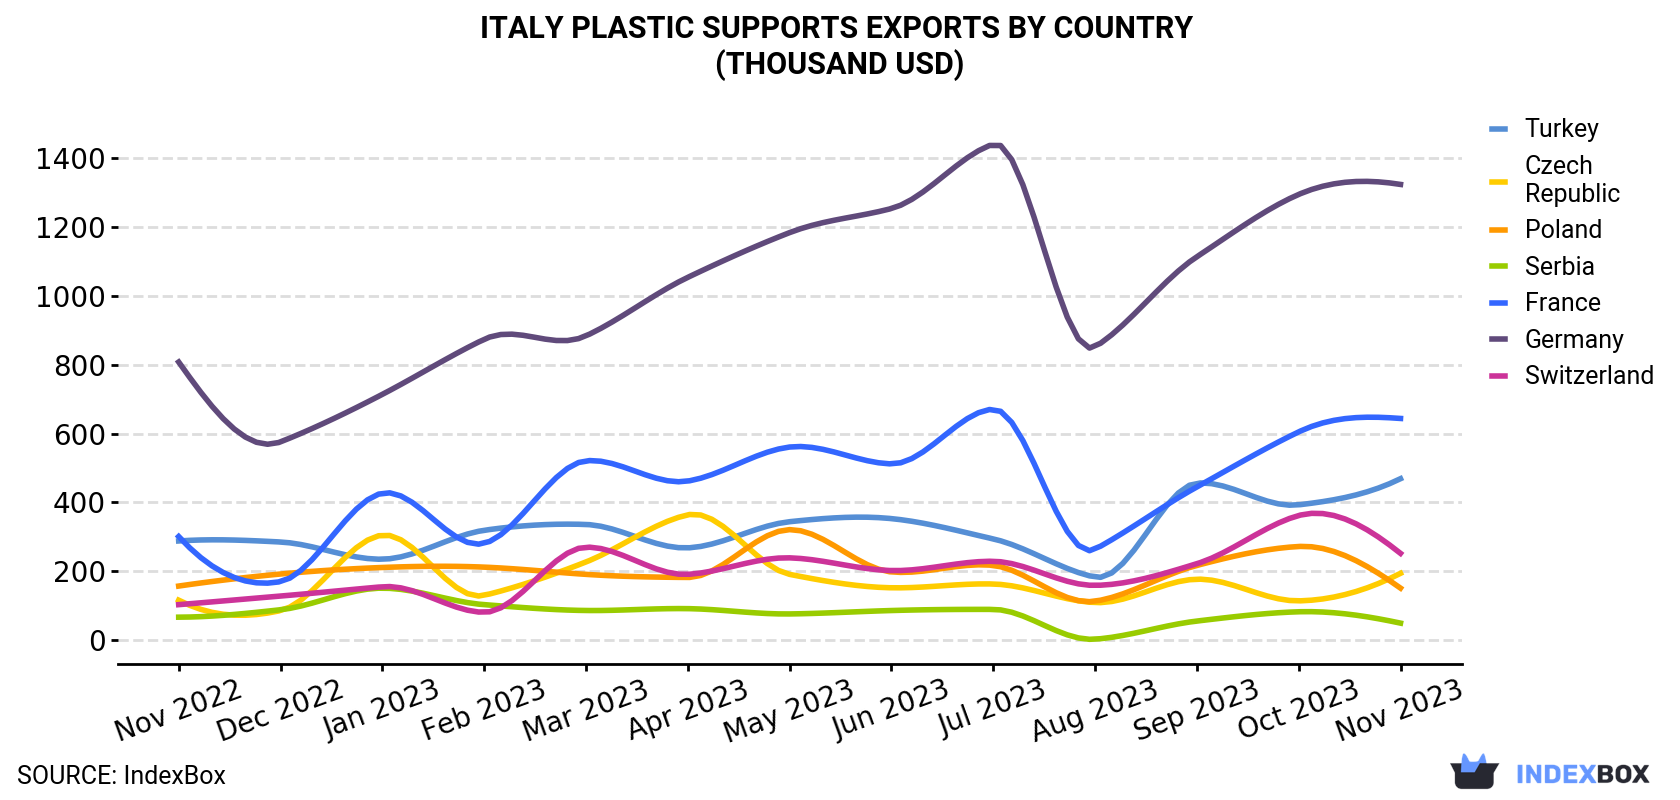 Italy Plastic Supports Exports By Country (Thousand USD)